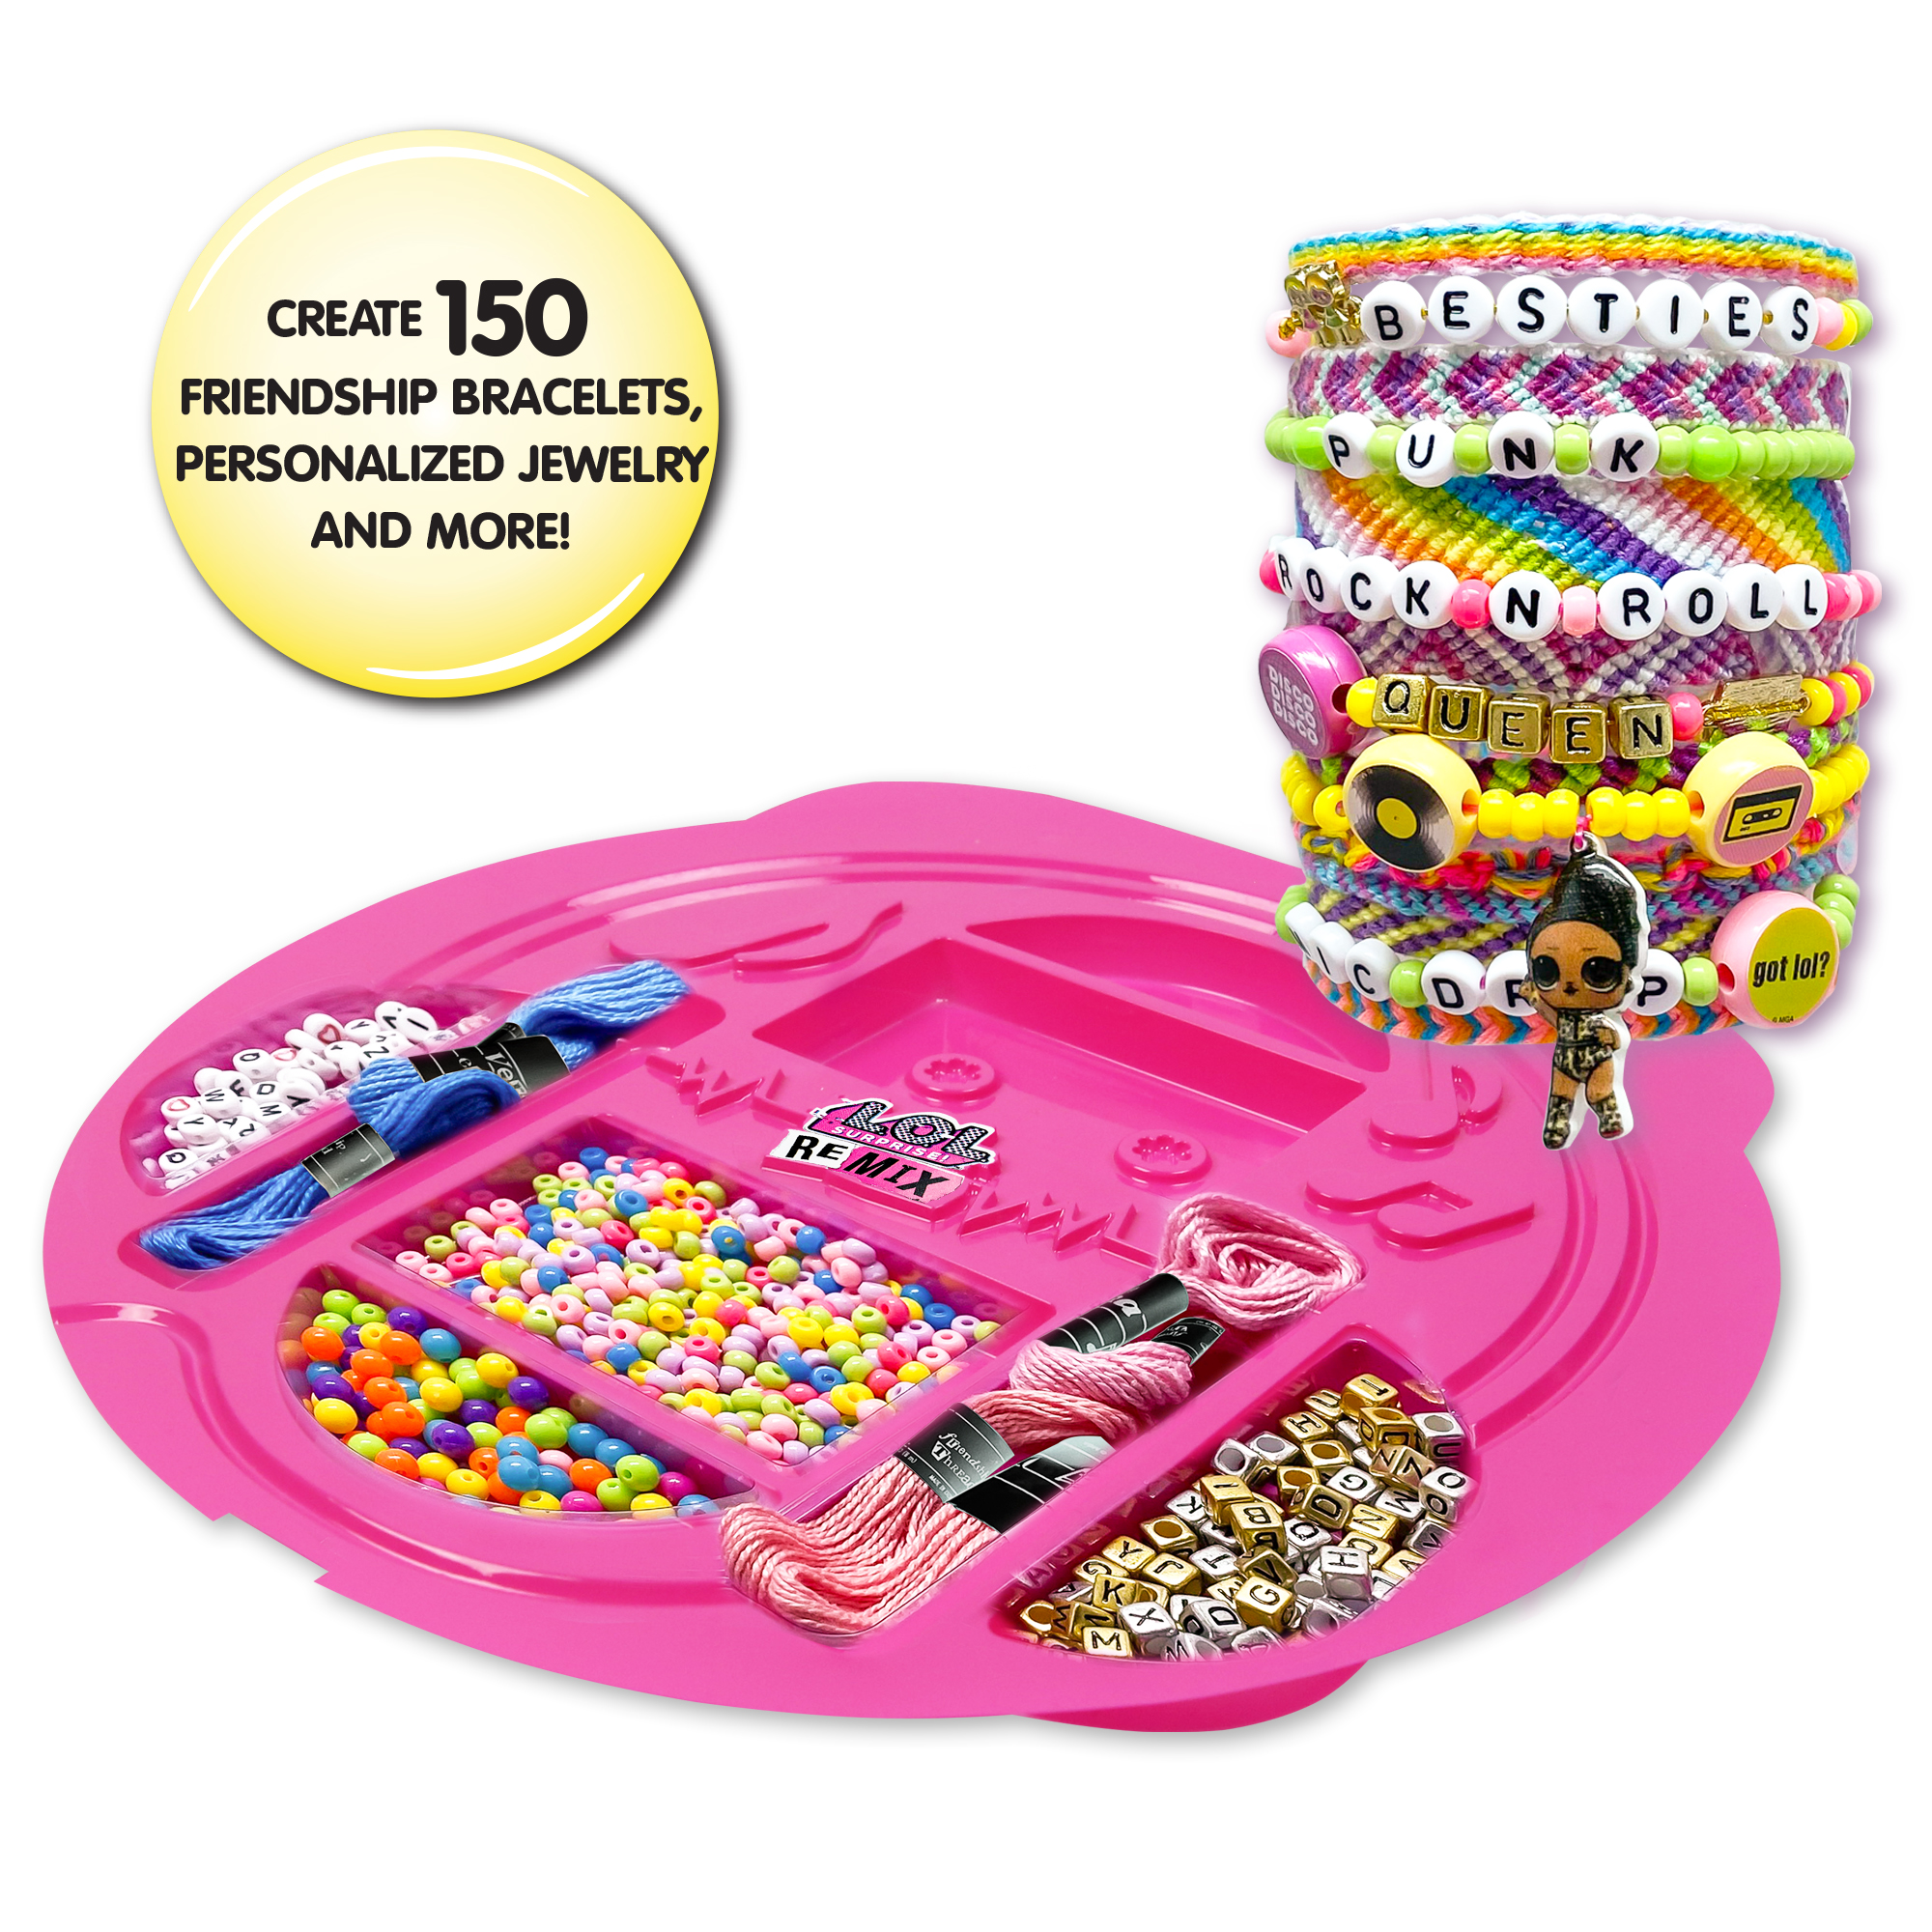 LOL Surprise! REMIX Rolling Jewelry Case, Storage & Jewelry Work Station, Create Over 120 Friendship Bracelets & Personalized Jewelry - image 4 of 9